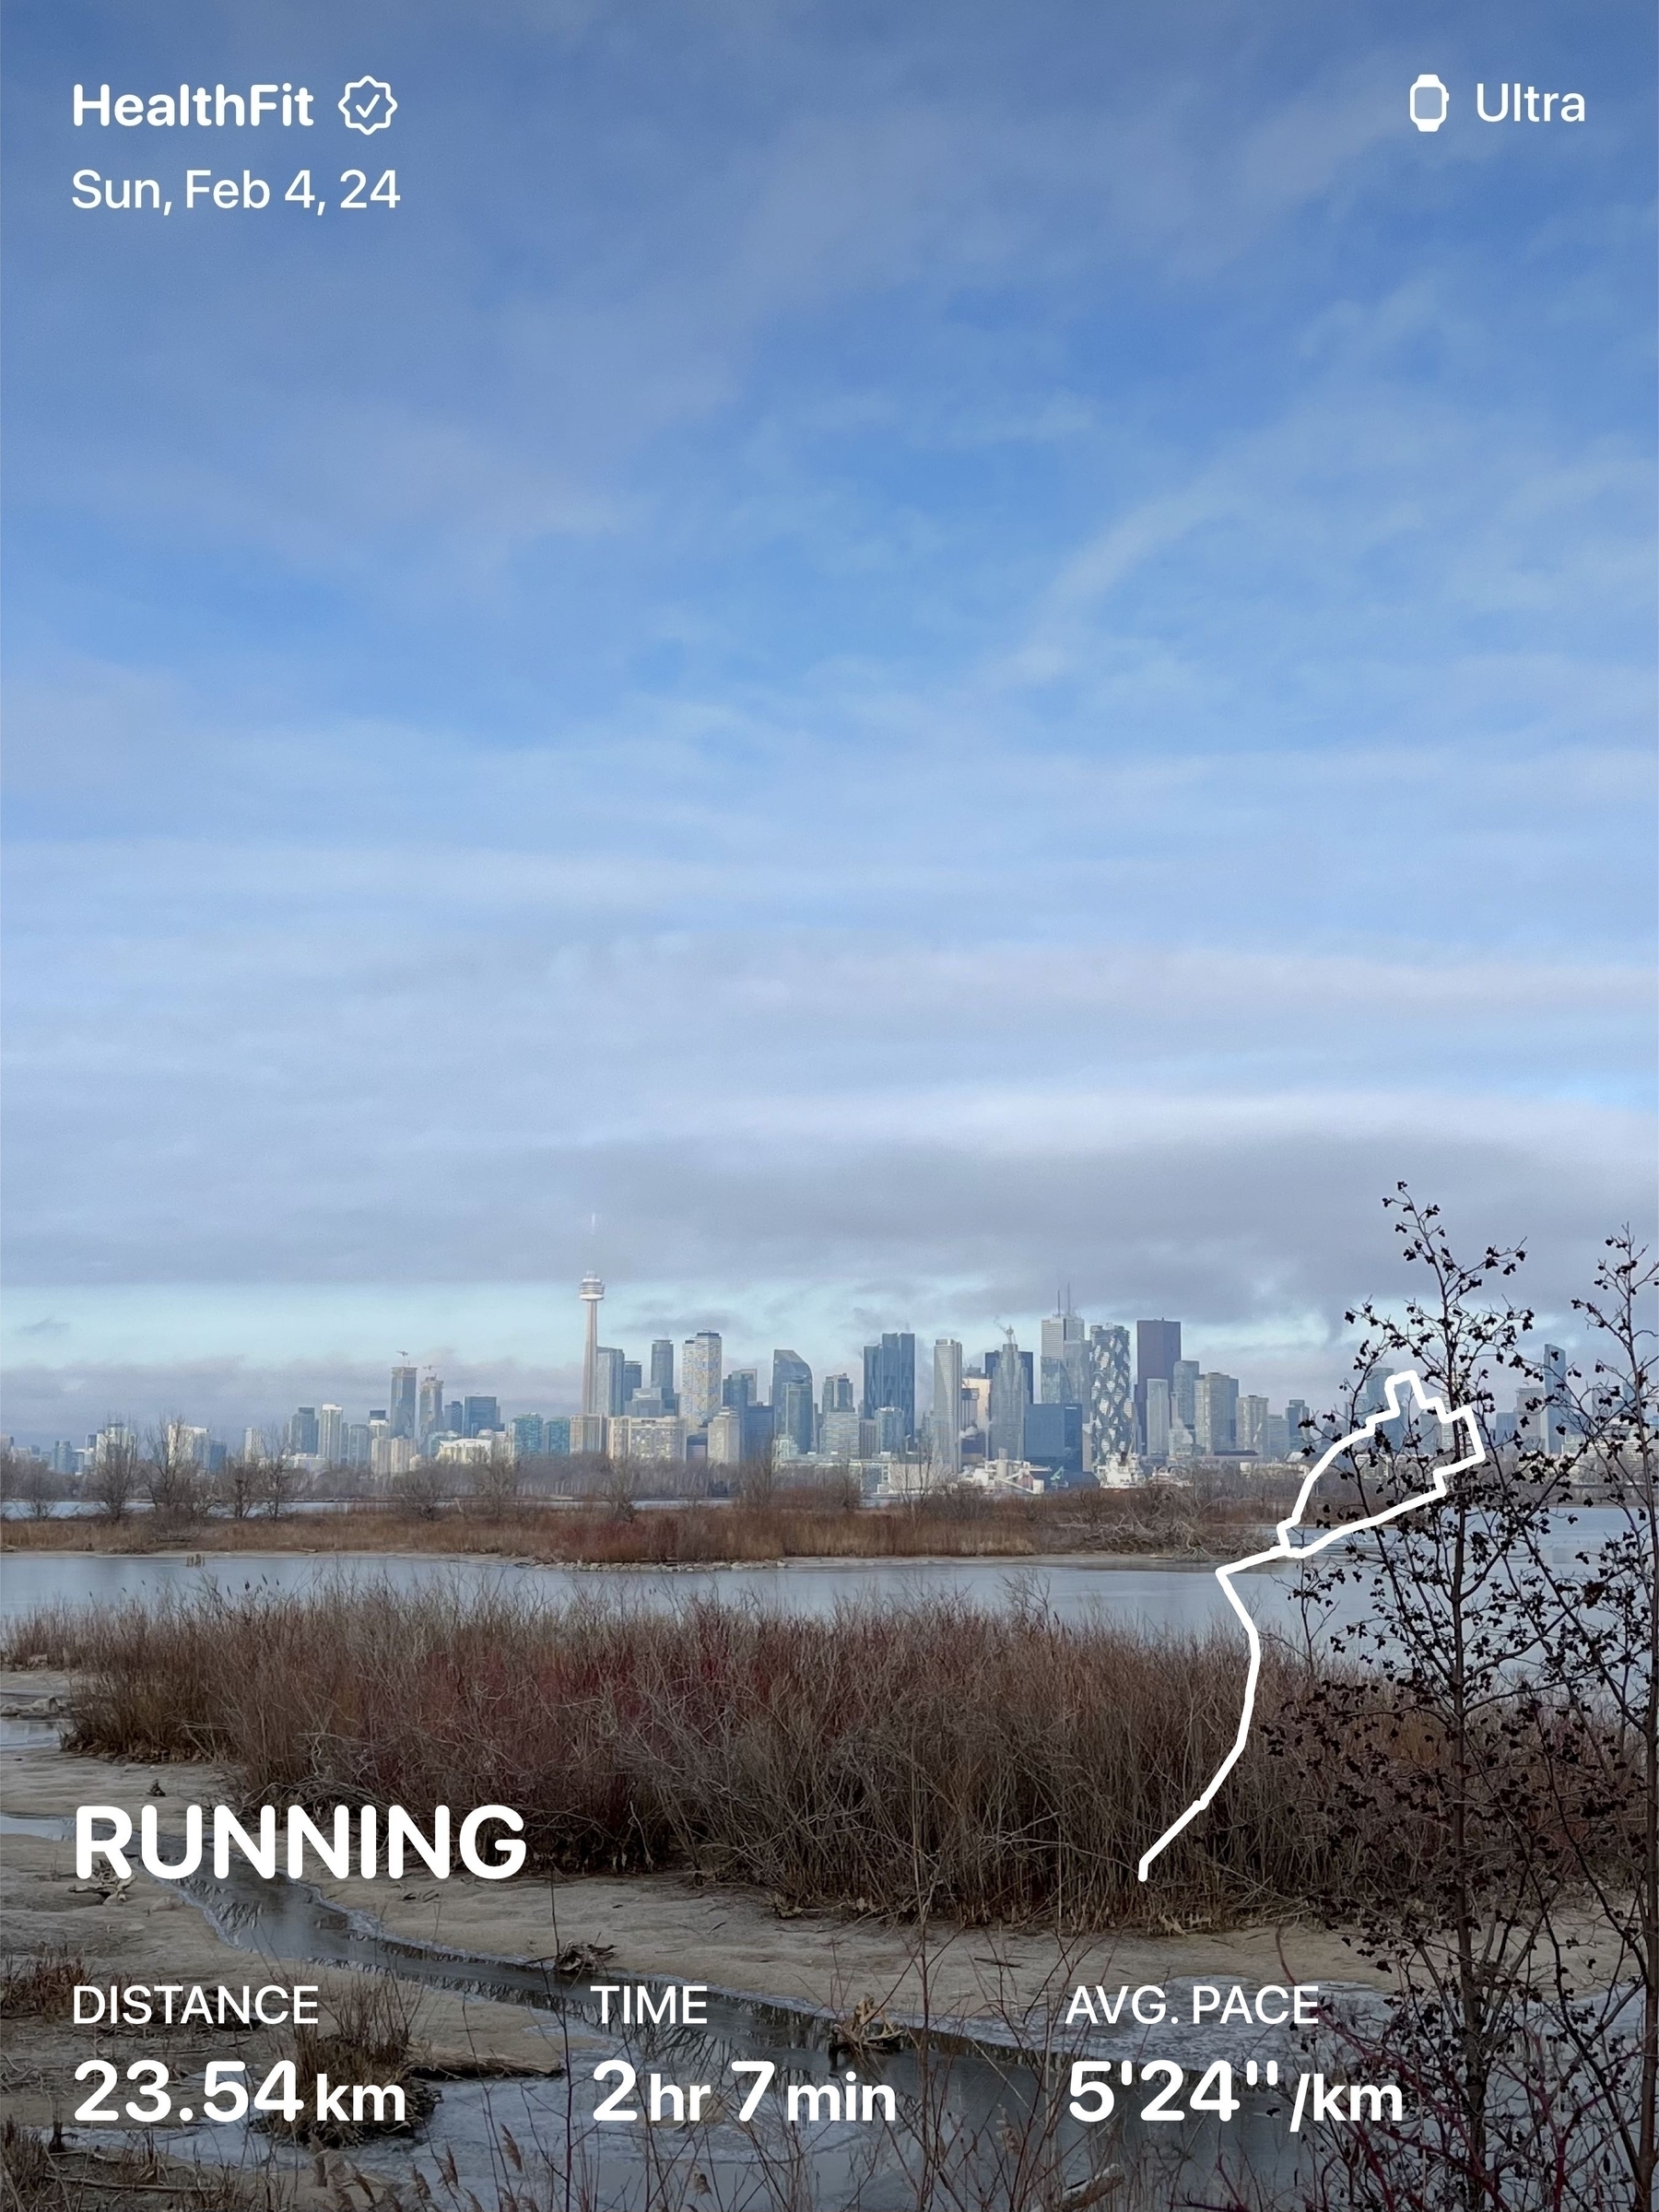 Toronto skyline from across the lake. Overlaid with running stats: 23.54 km in 2h11m